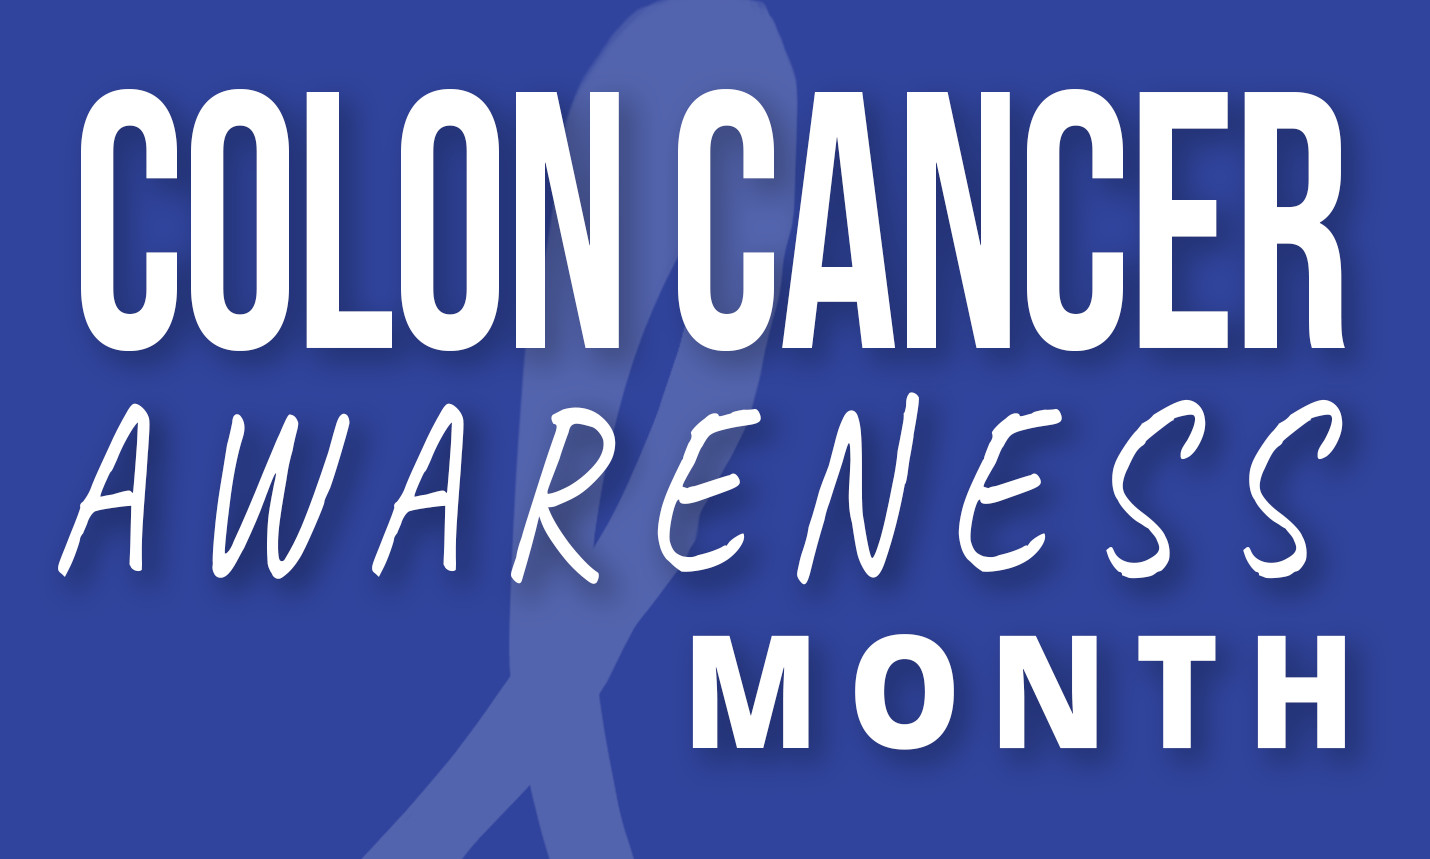 Colon Cancer Awareness Month | HealthSoul